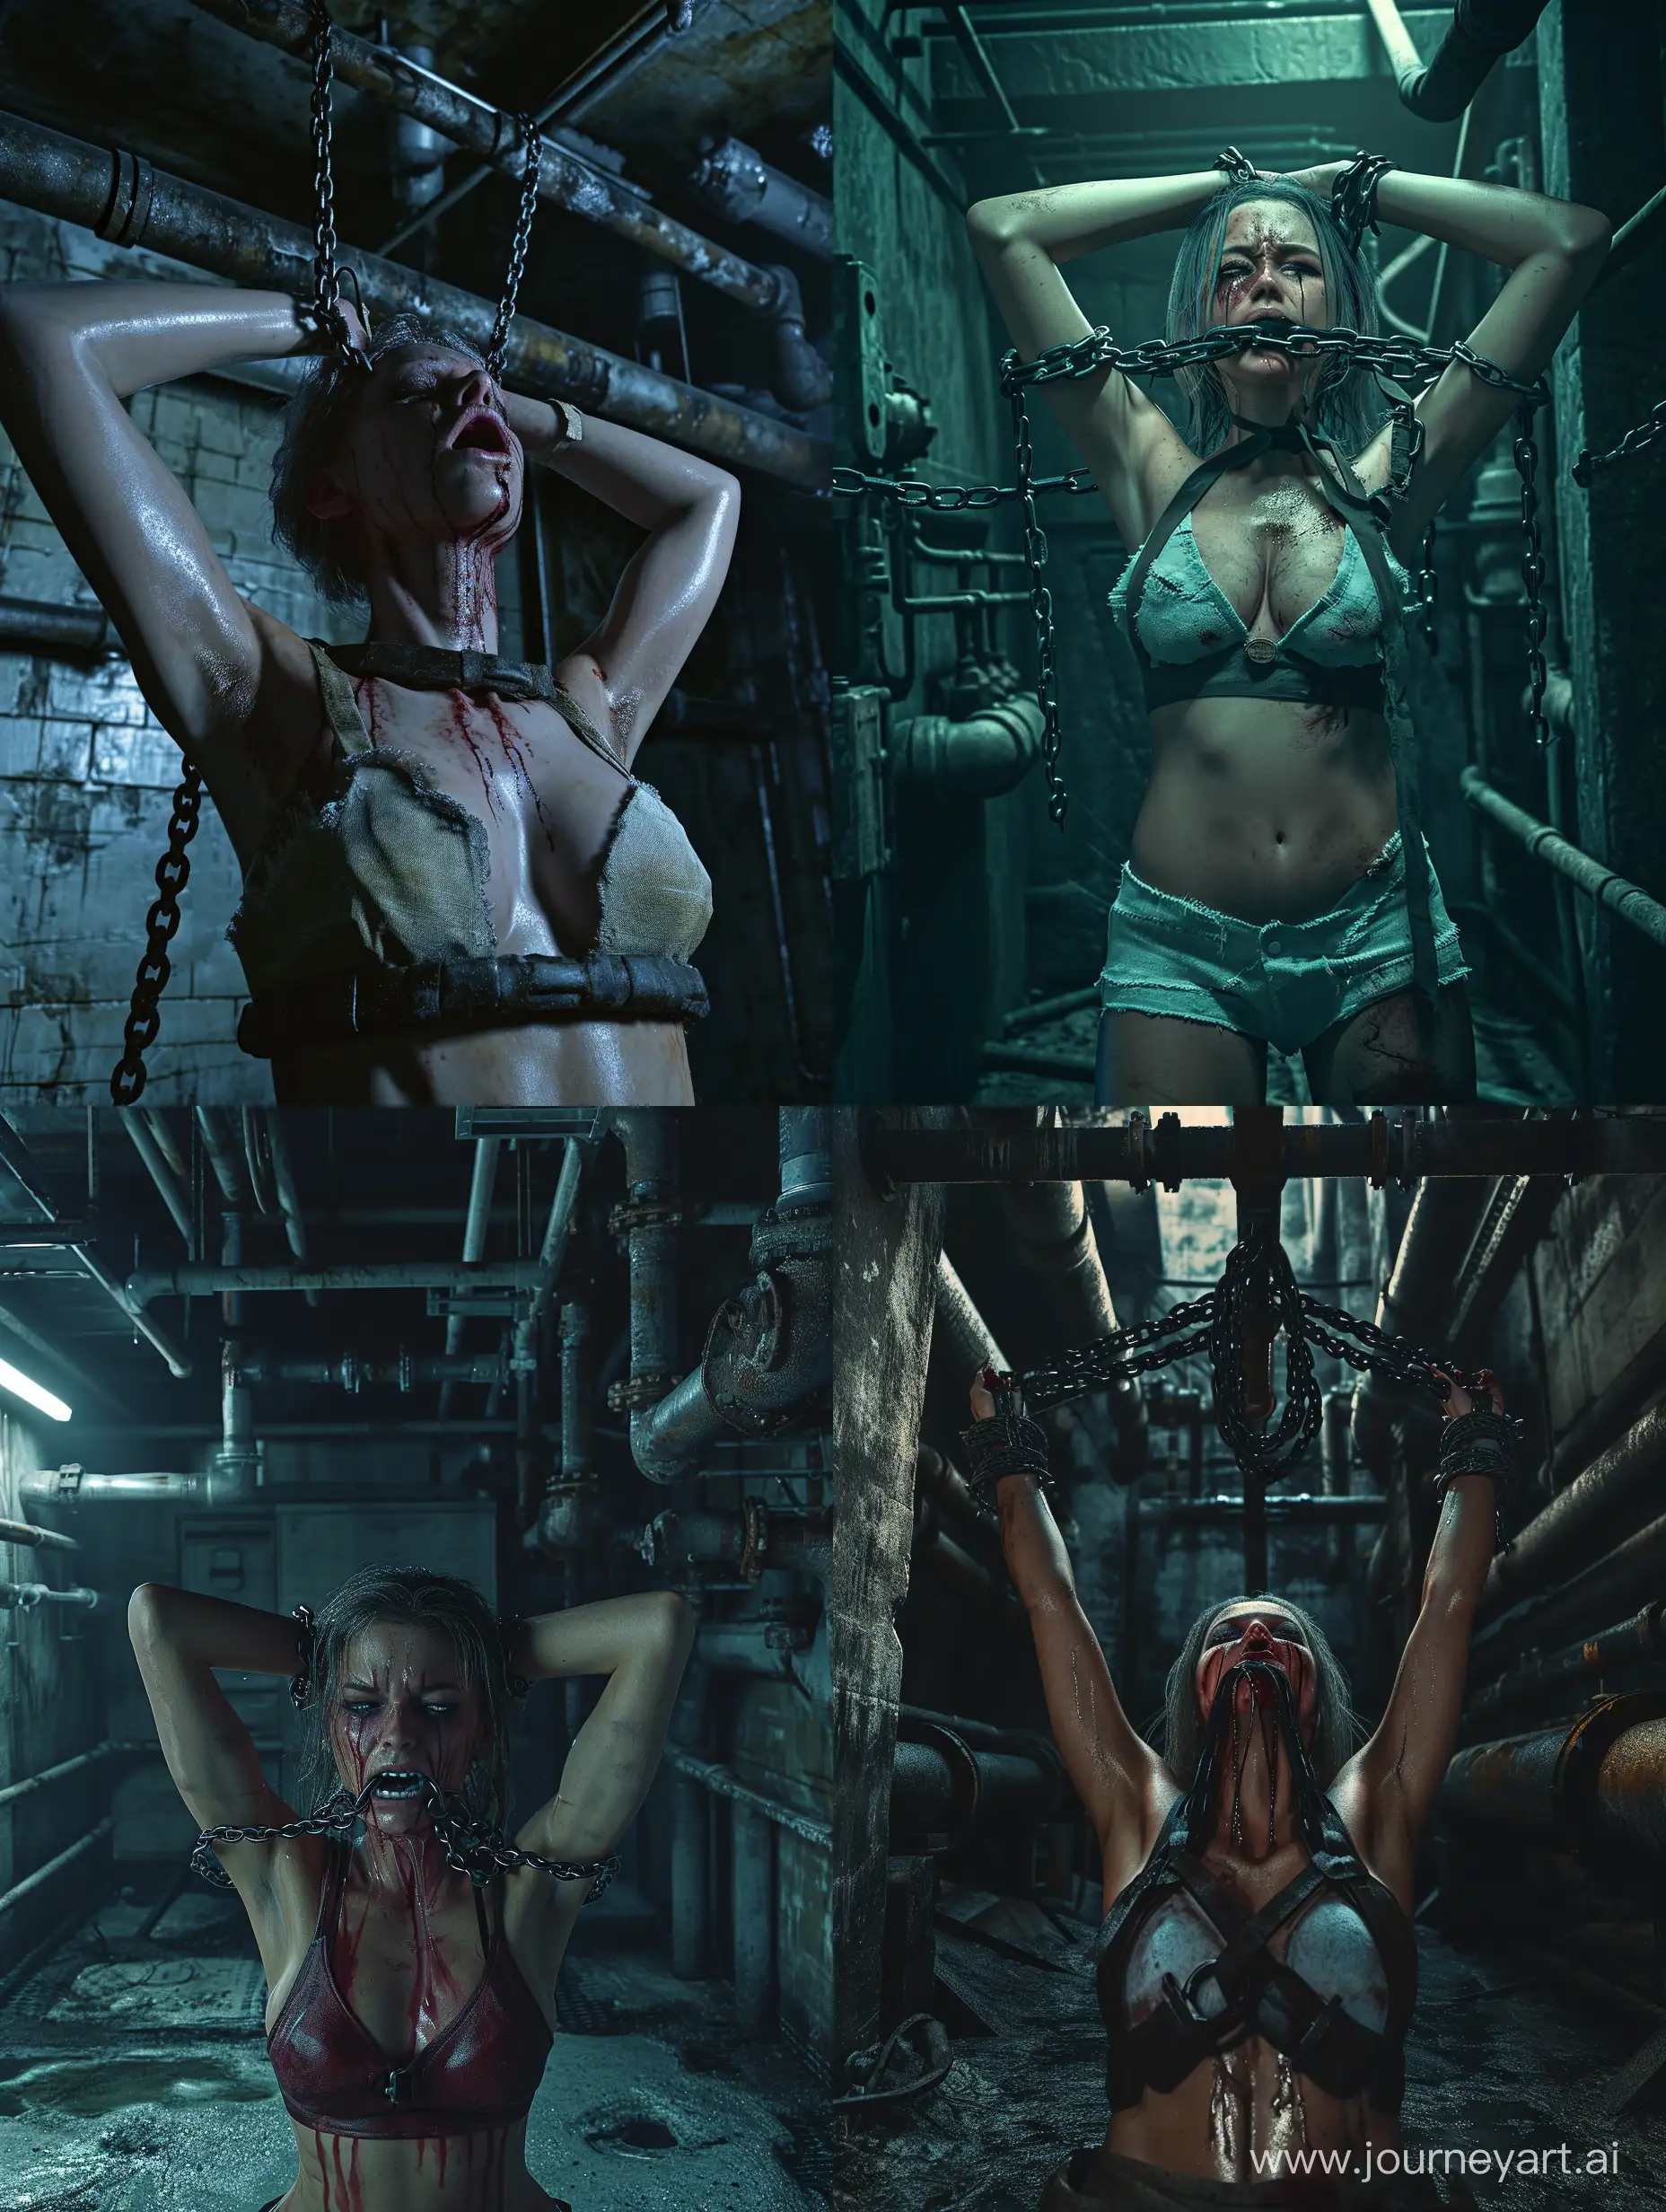  Ominous full body image of woman, unhinged | chained harness in mouth | desolate building with exposed pipes | night scene | shackled | chained | arms bound above head | makeup tear stained face | epic cinematography shot on Nikon | color grading I atmospheric I color_shading I deep depth of field | HDR | 3D digital photoillustration | dark shadows I ambient occlusion I high resolution I intricate I advanced composition I high contrast I entang expansive I hyperreal textures I accurate_anatomy I vibrant realism